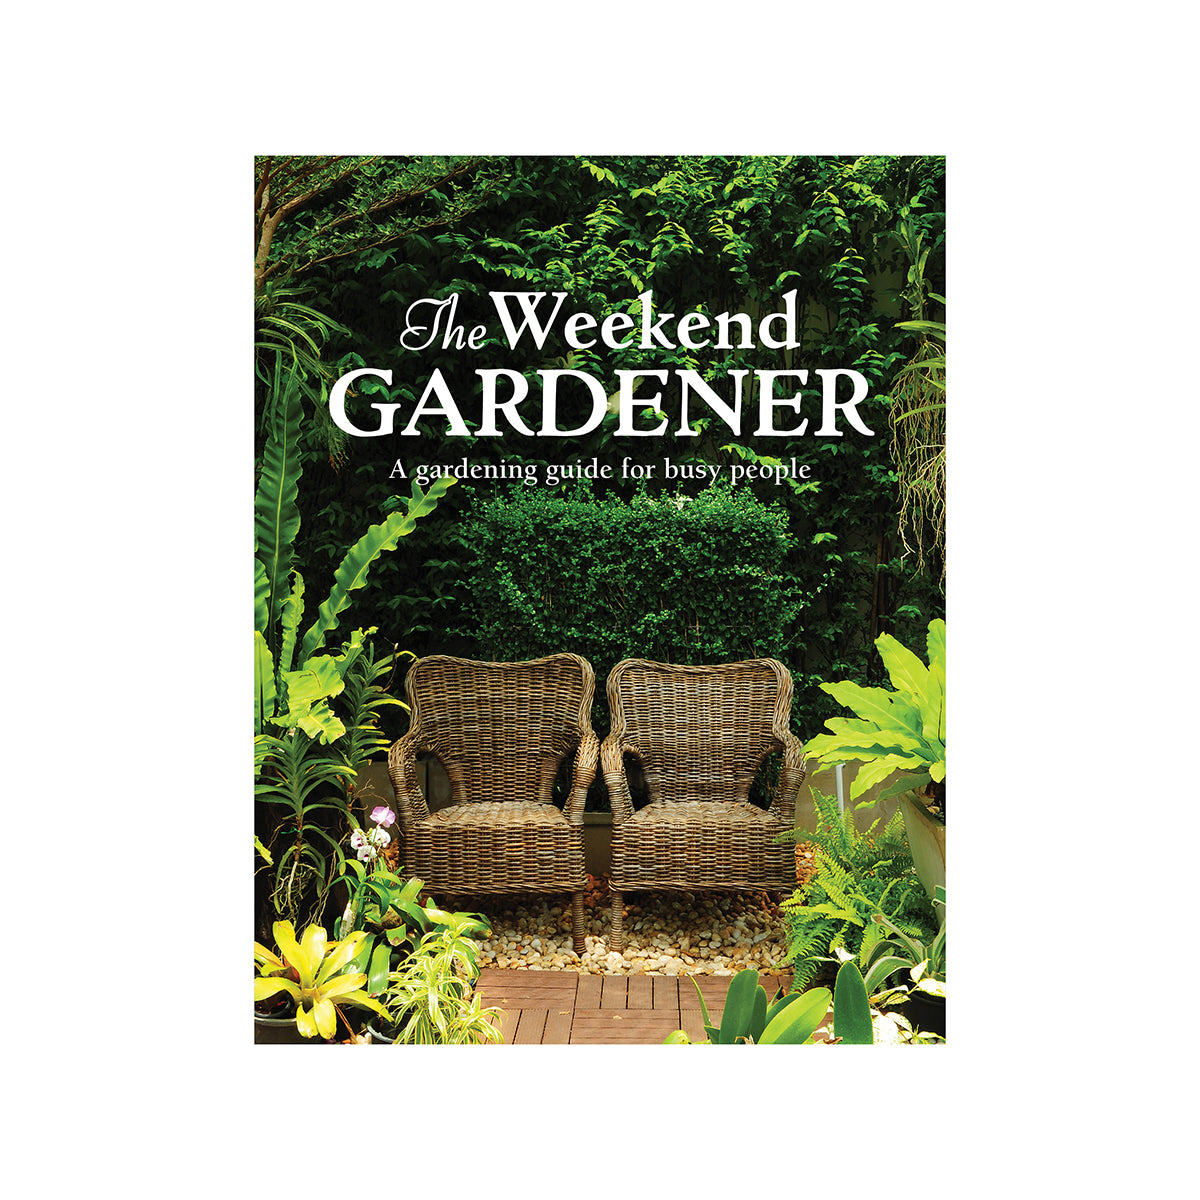 The Weekend Gardener A Gardening Guide for Busy People